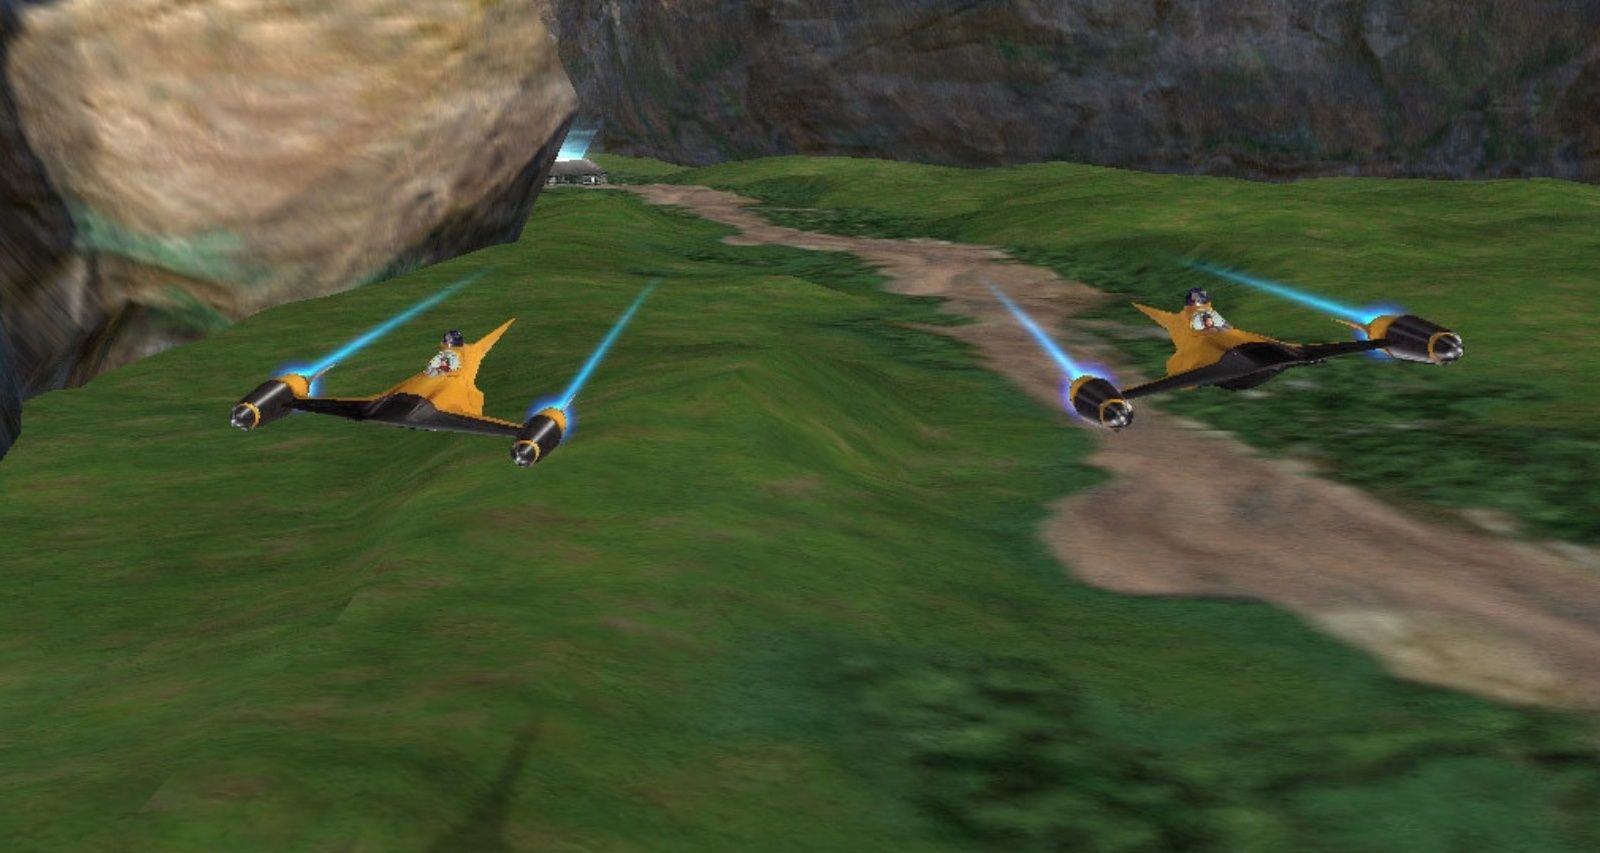 two naboo starfighters flying over grassy hills